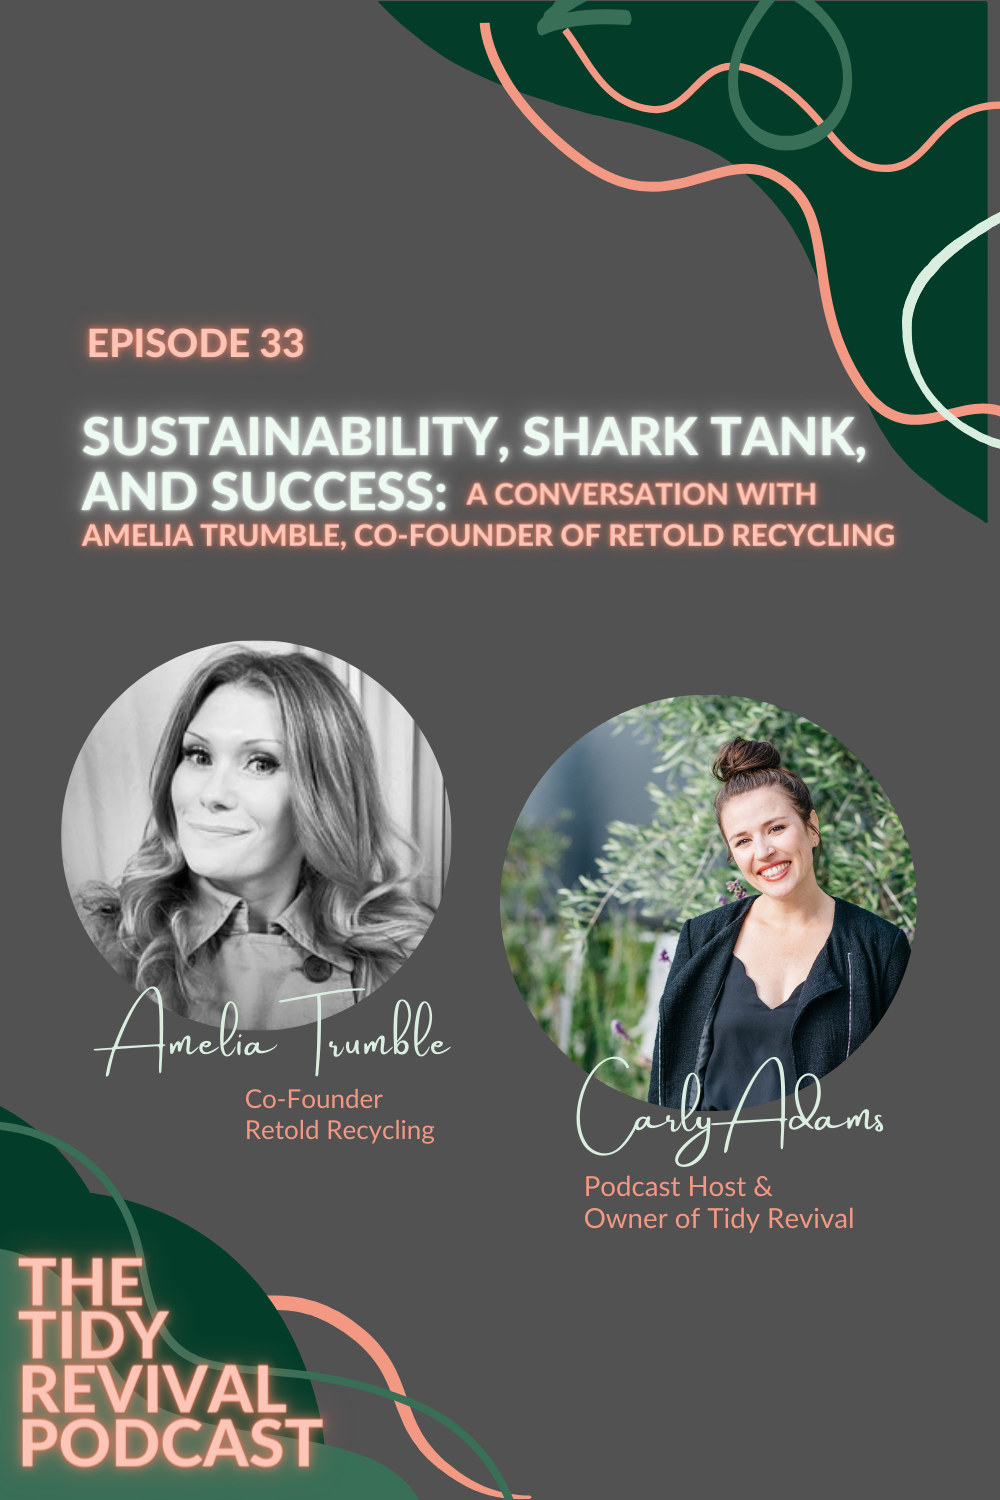 Sustainability, Shark Tank, and Success: Featuring Amelia Trumble,  Co-Founder of Retold Recycling